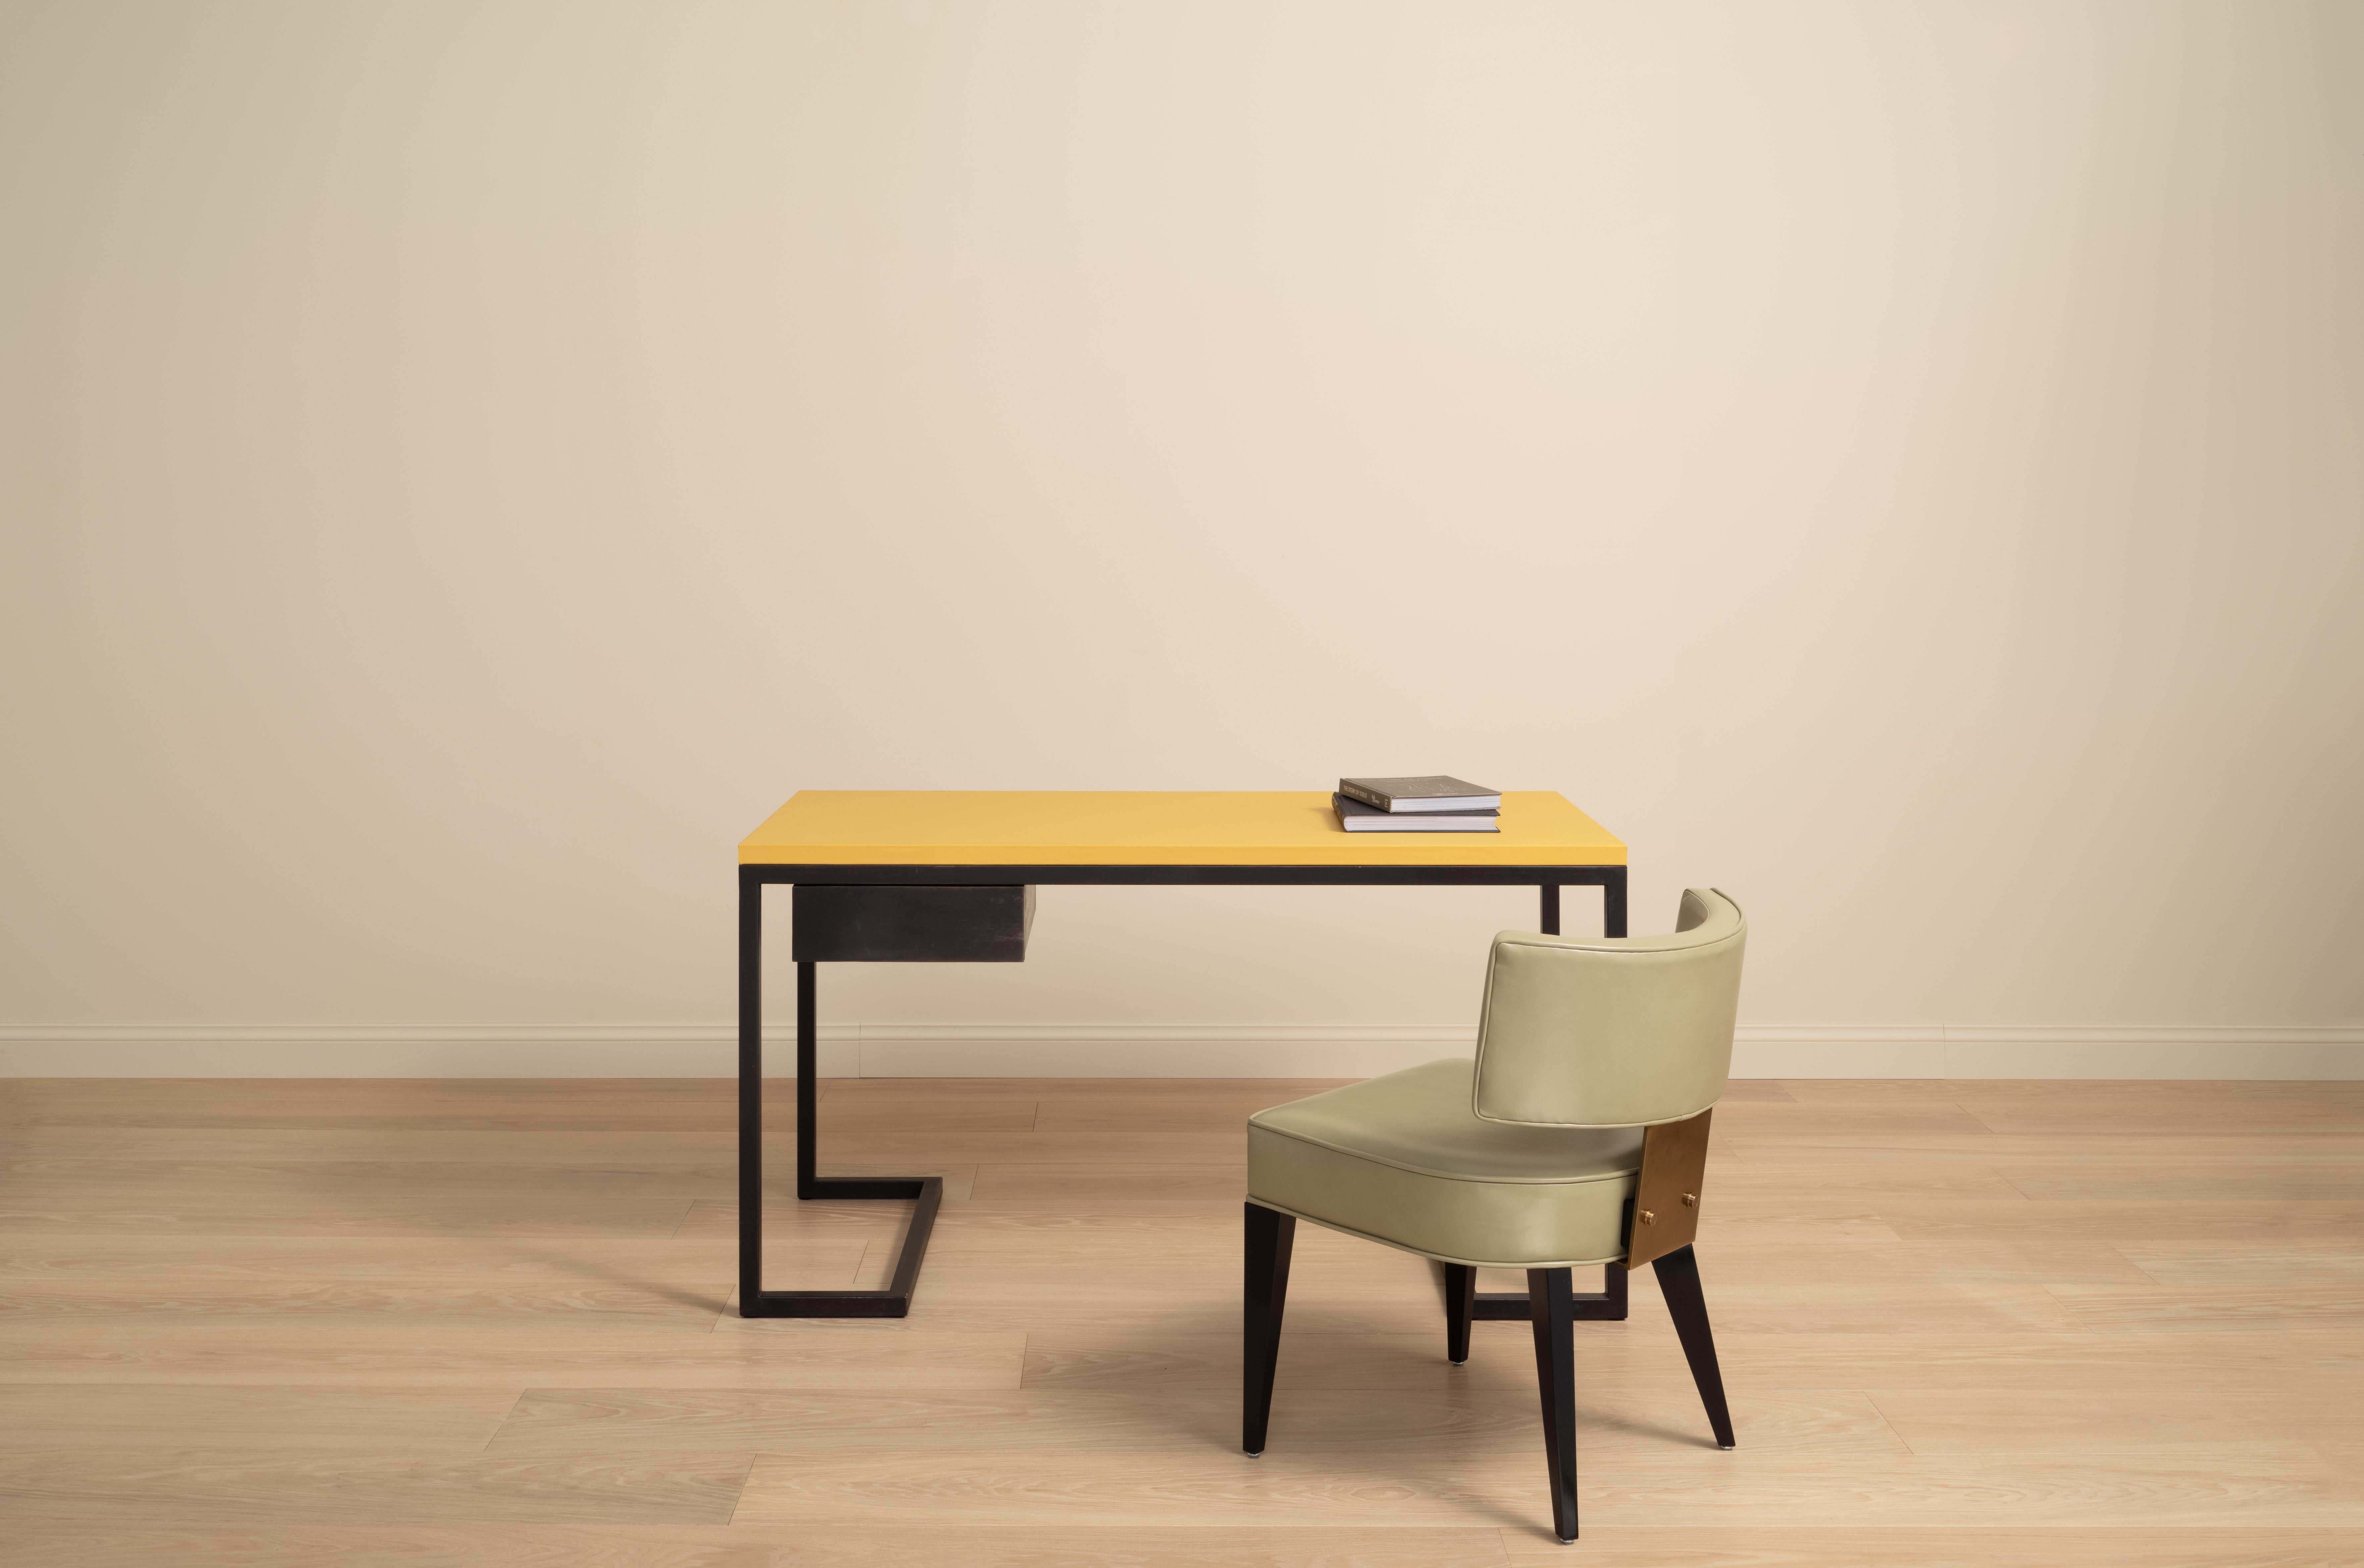 Blackened Rupert Bevan Atomic Desk (in Customer's Own Choice of Leather) For Sale